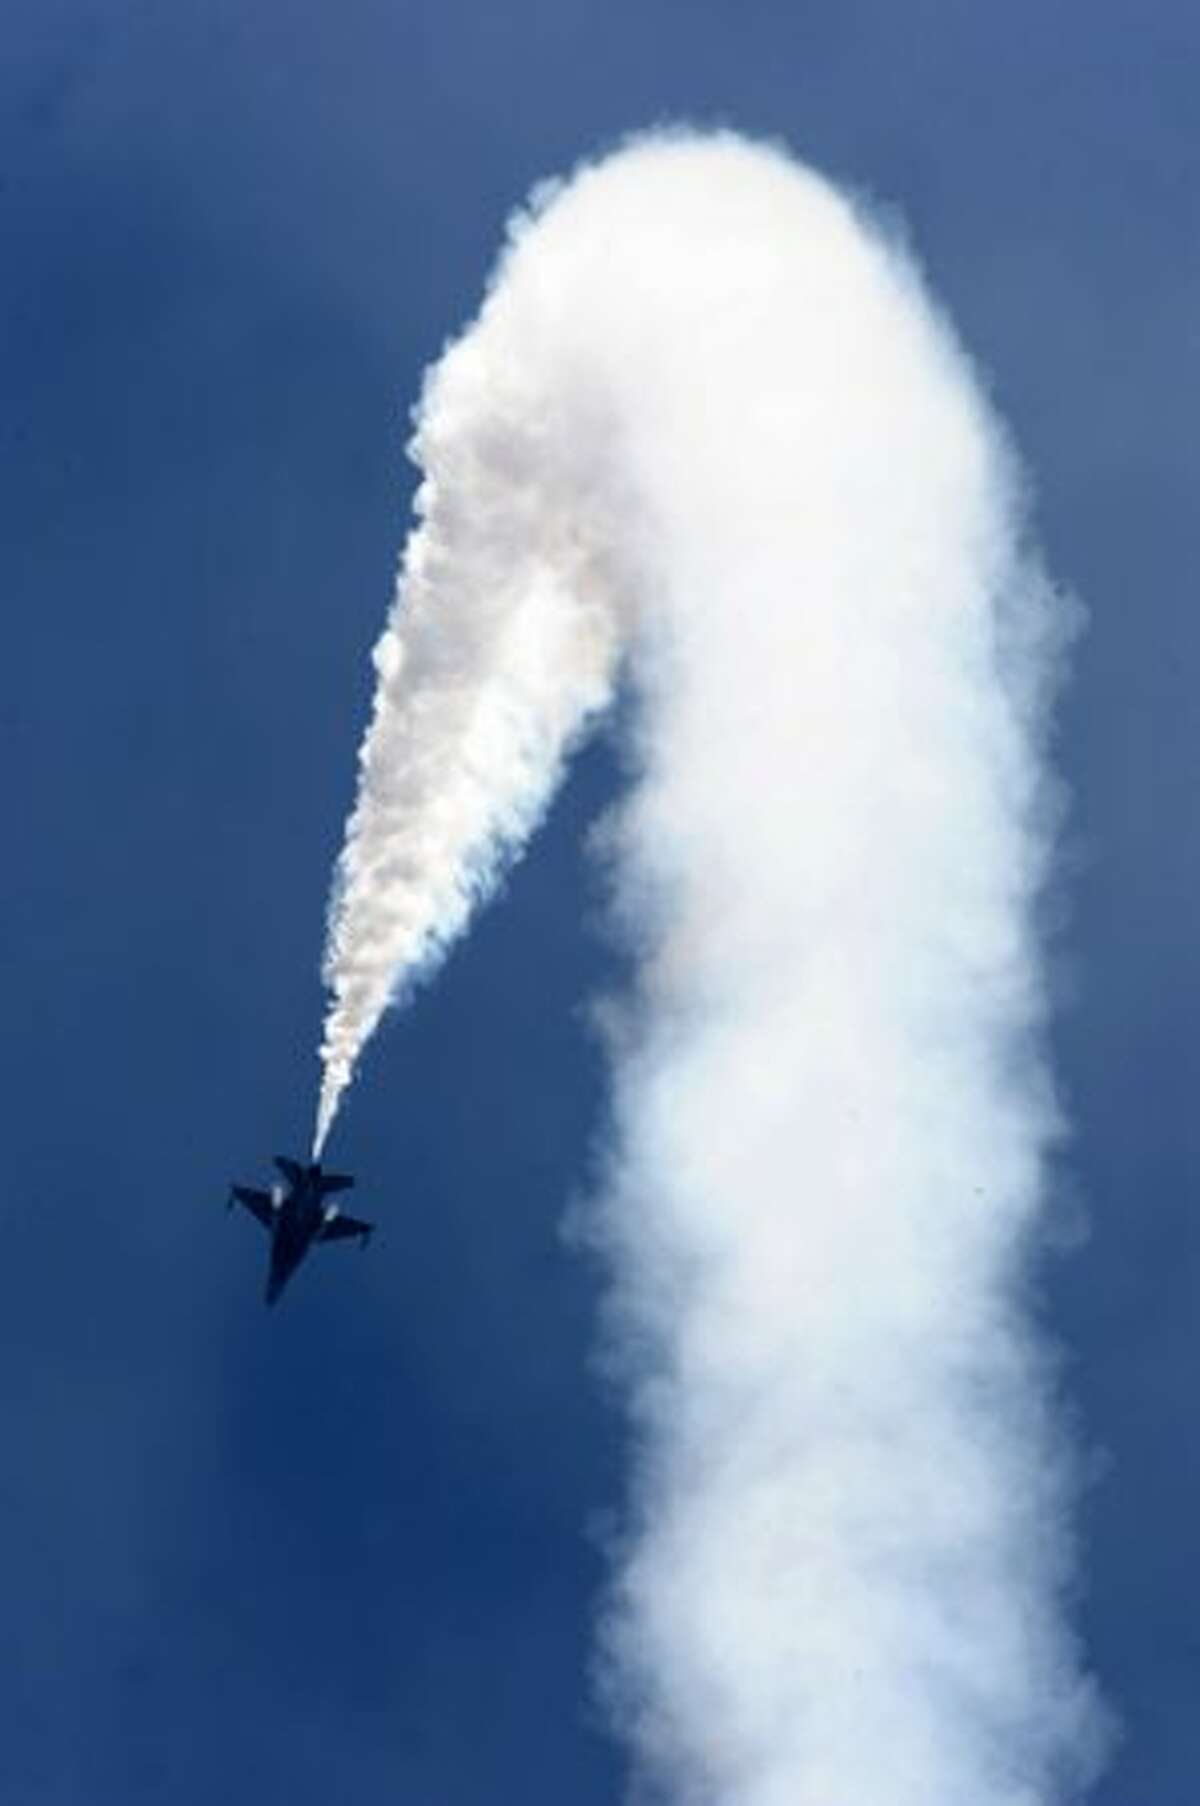 A Republic of Singapore Air Force F-16 performs during a flight display at the Singapore Airshow 2010 on Feb. 2, 2010.